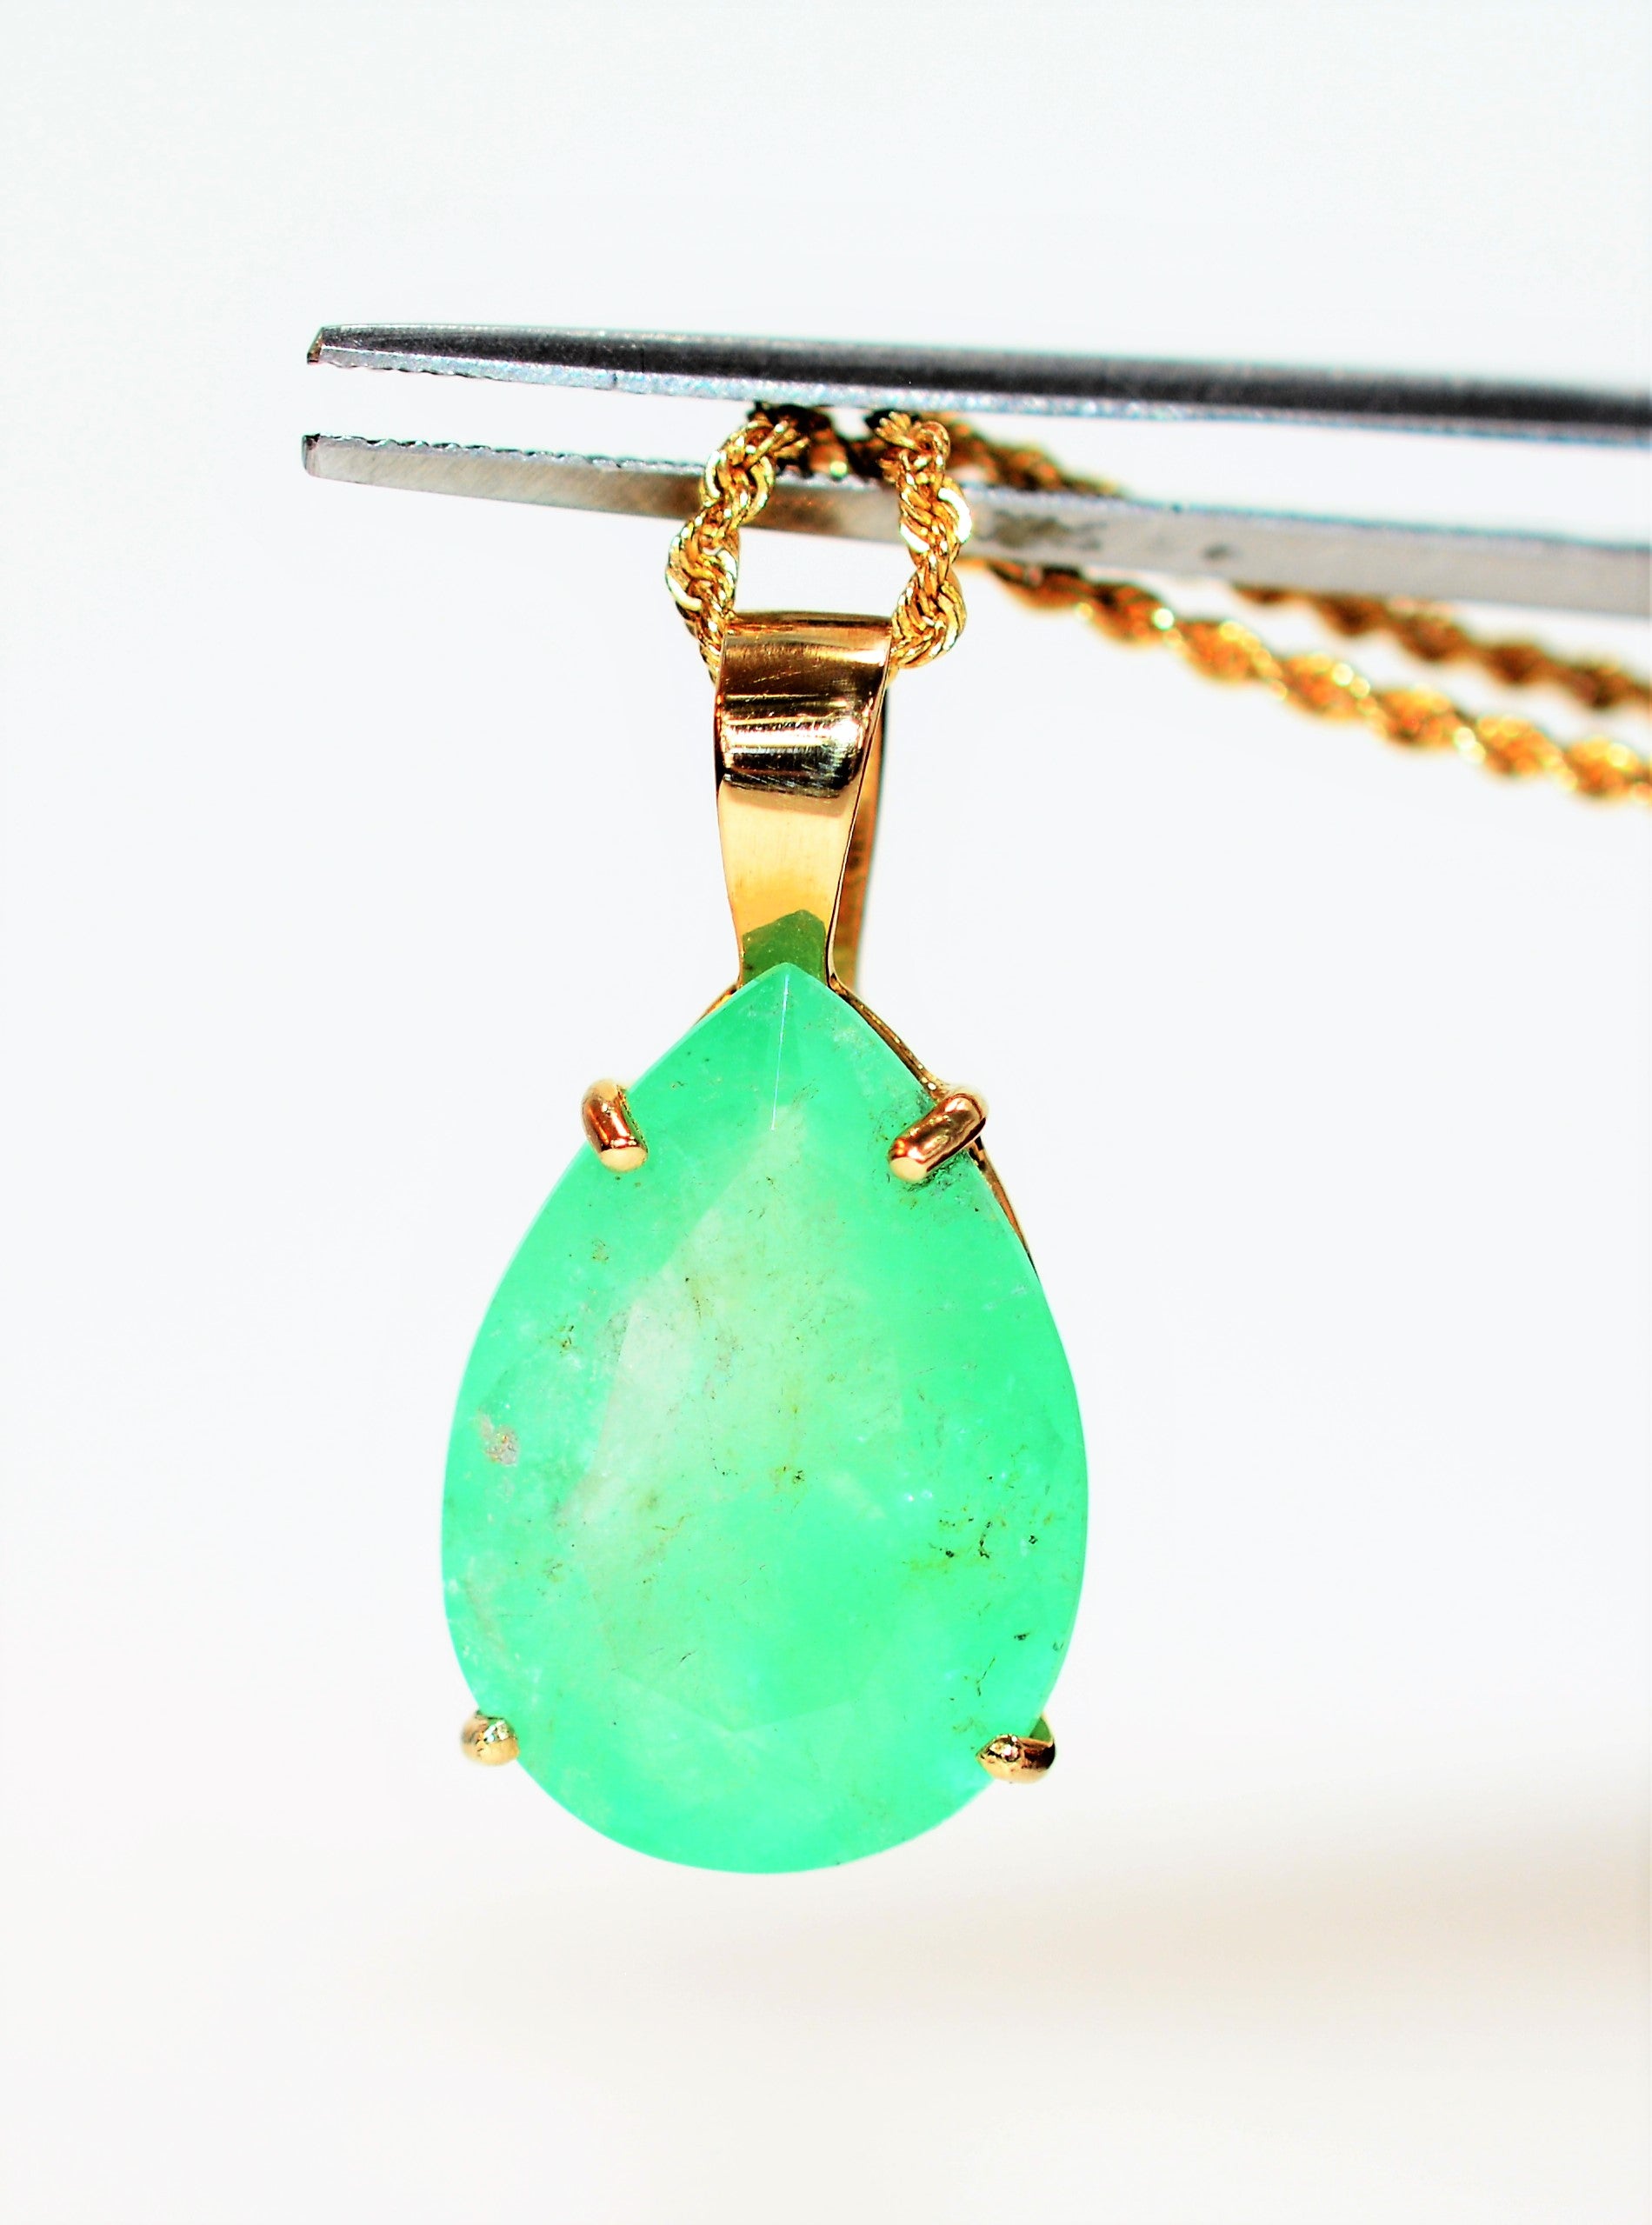 Tiny May Birthstone Necklace / Genuine Faceted Colombian Emerald / Sterling  Silver / 14k Yellow Gold Filled / 14k Rose Gold Filled